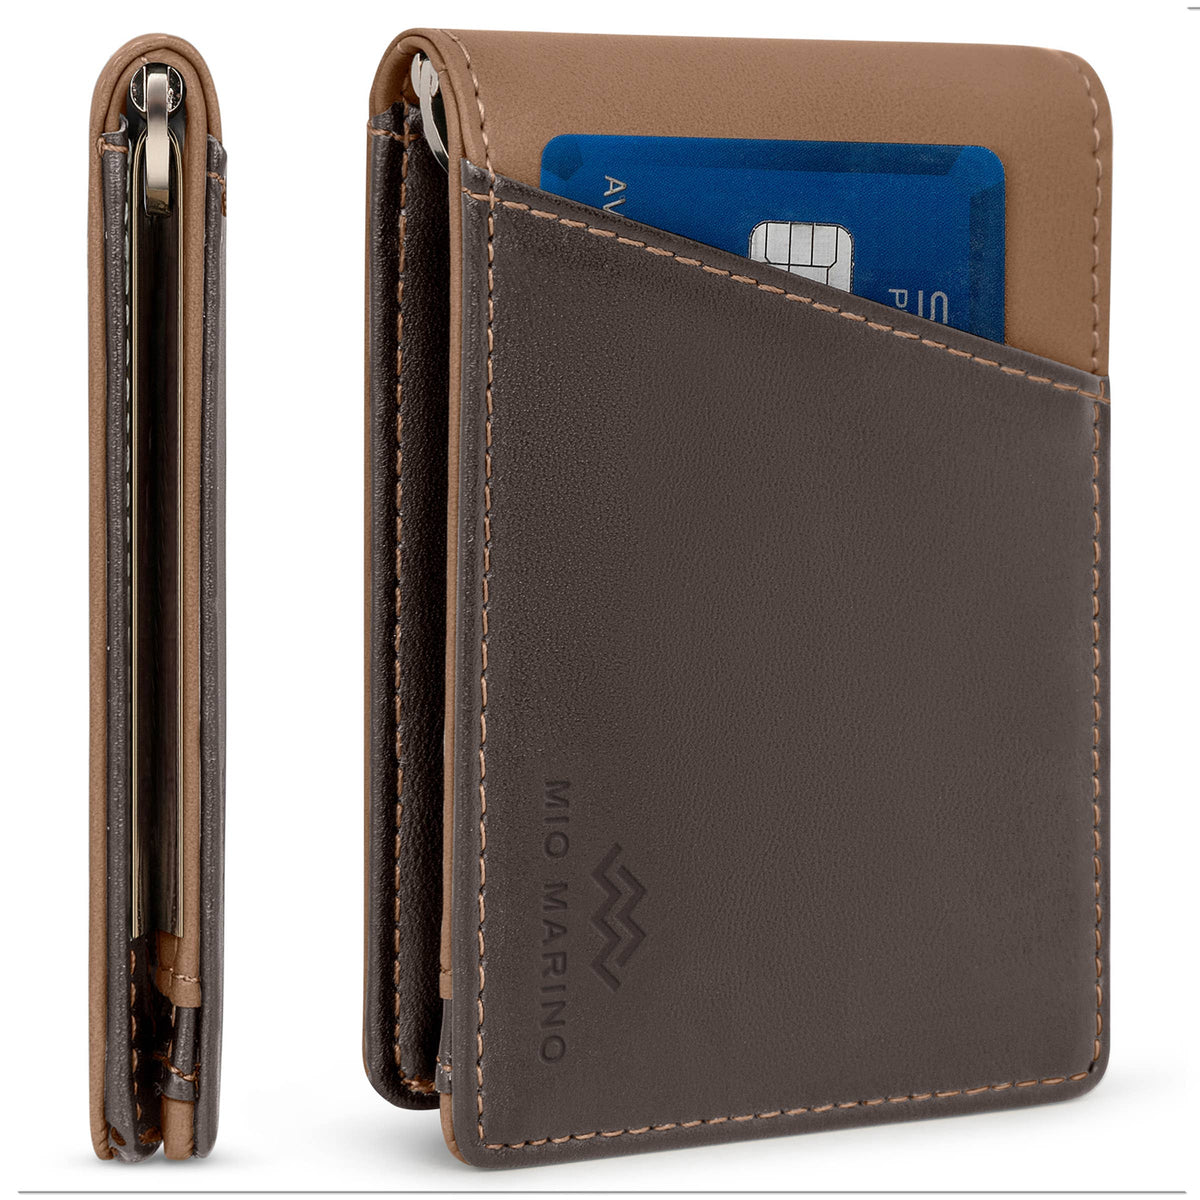 Mio Marino - Men's Slim Bifold Wallet with Quick Access Pull Tab: Carbon Black/Brown - WALLET - Synik Clothing - synikclothing.com